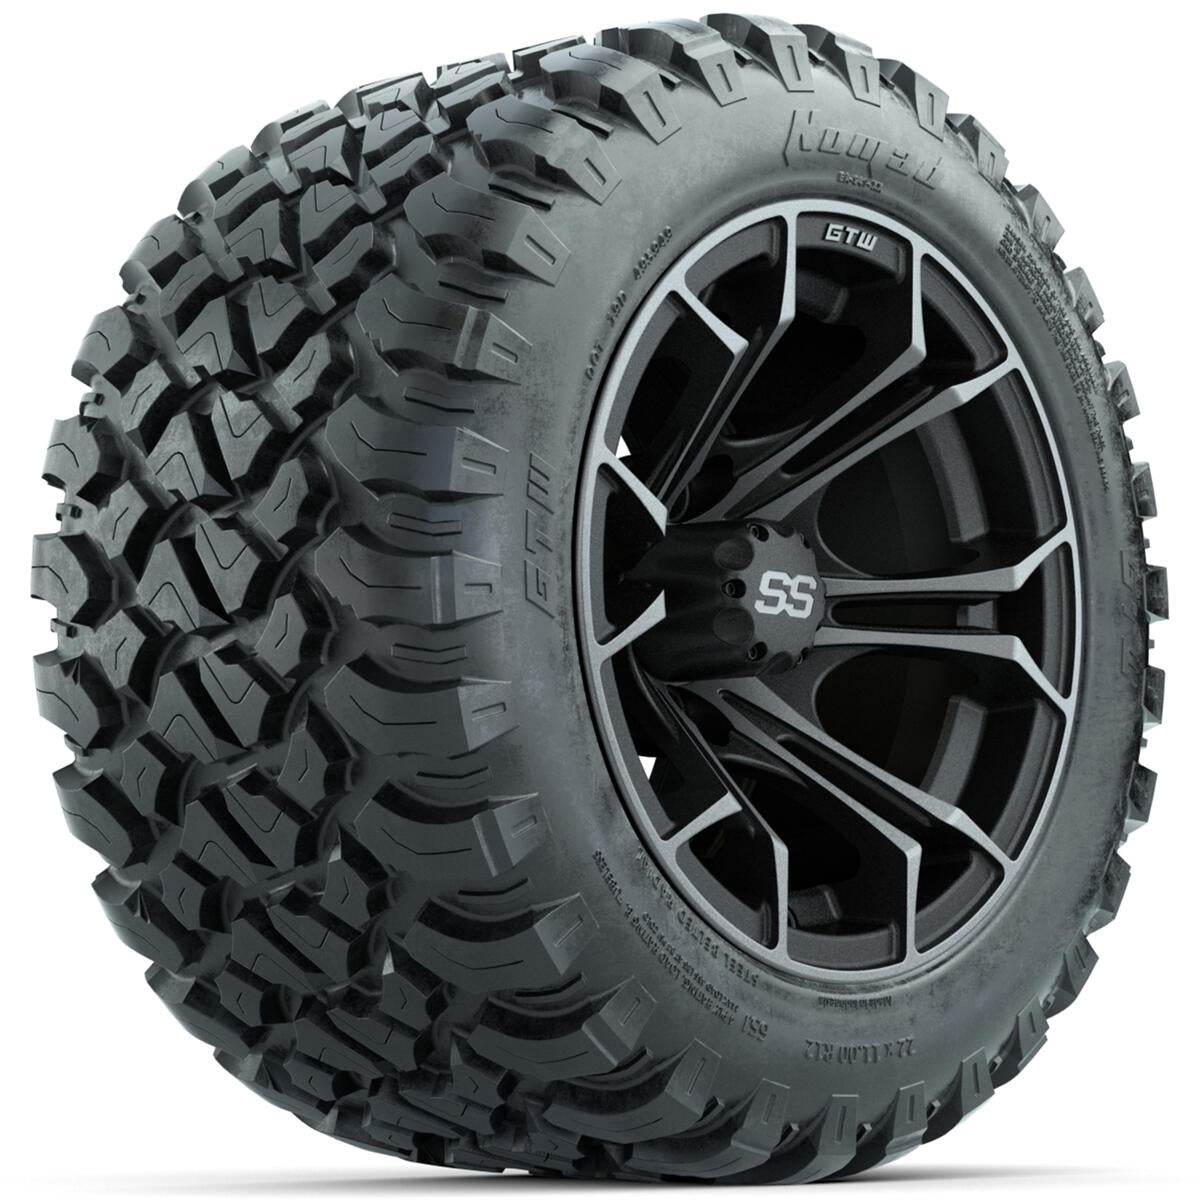 Set of 4 12"in GTW Spyder Wheels with 22x11-R12"GTW Nomad All-Terrain Tires A19-713